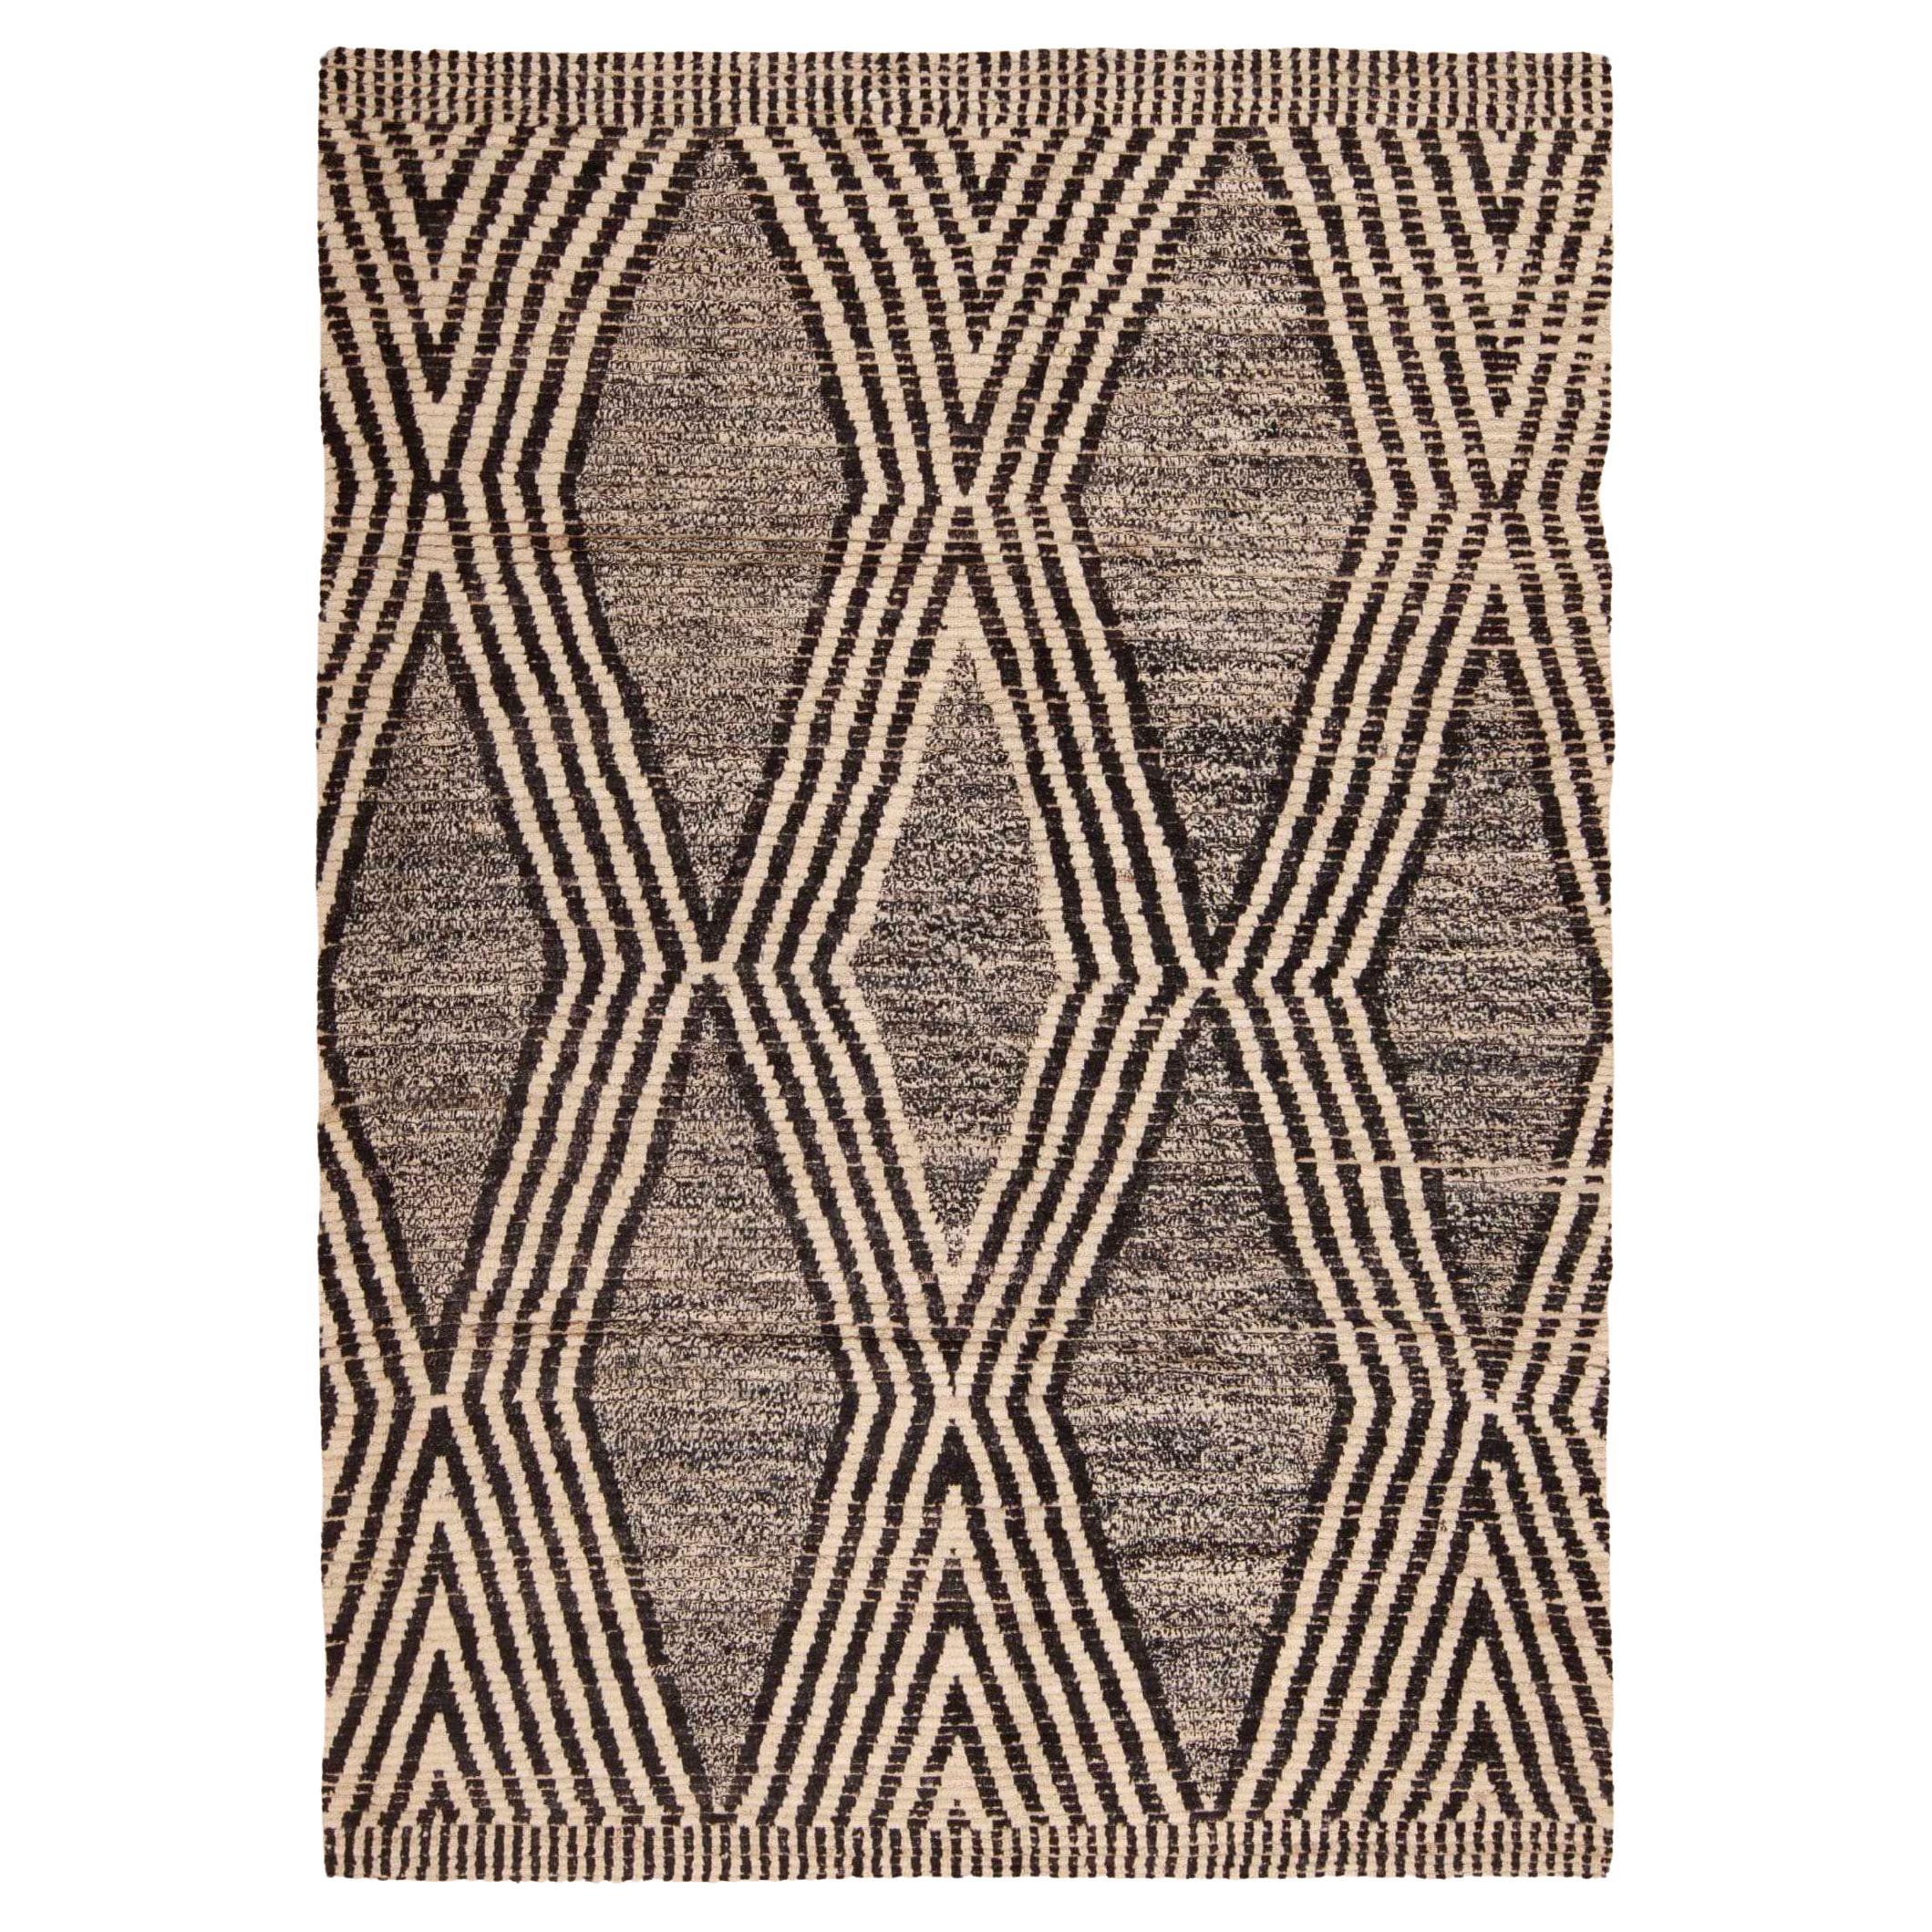 Nazmiyal Collection Bold Modern Geometric Tribal Pattern Area Rug 7'3" x 9'10" For Sale